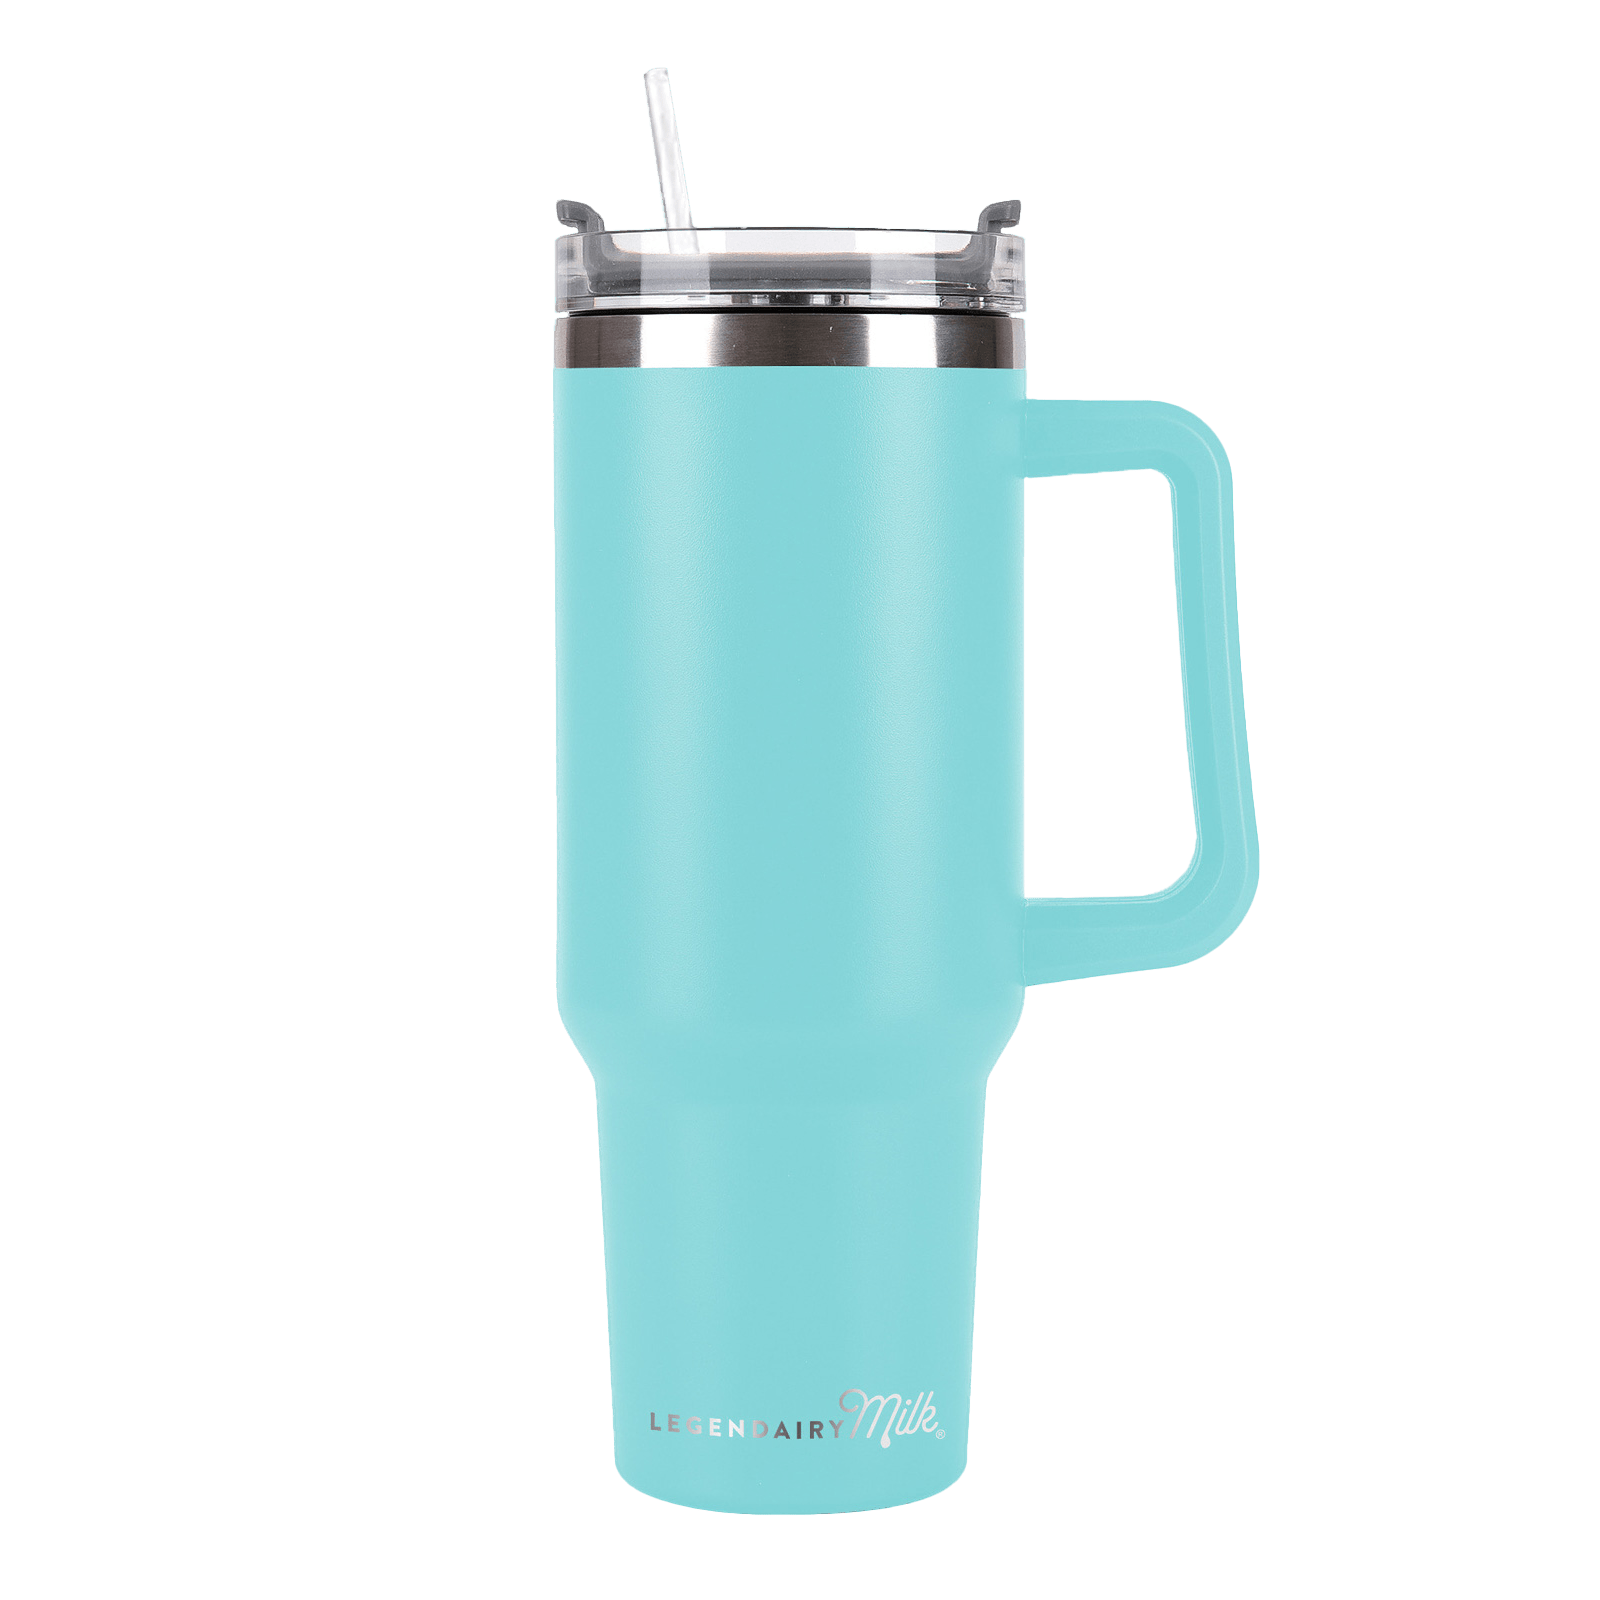 Tumbler - Large Stainless Happy Handle